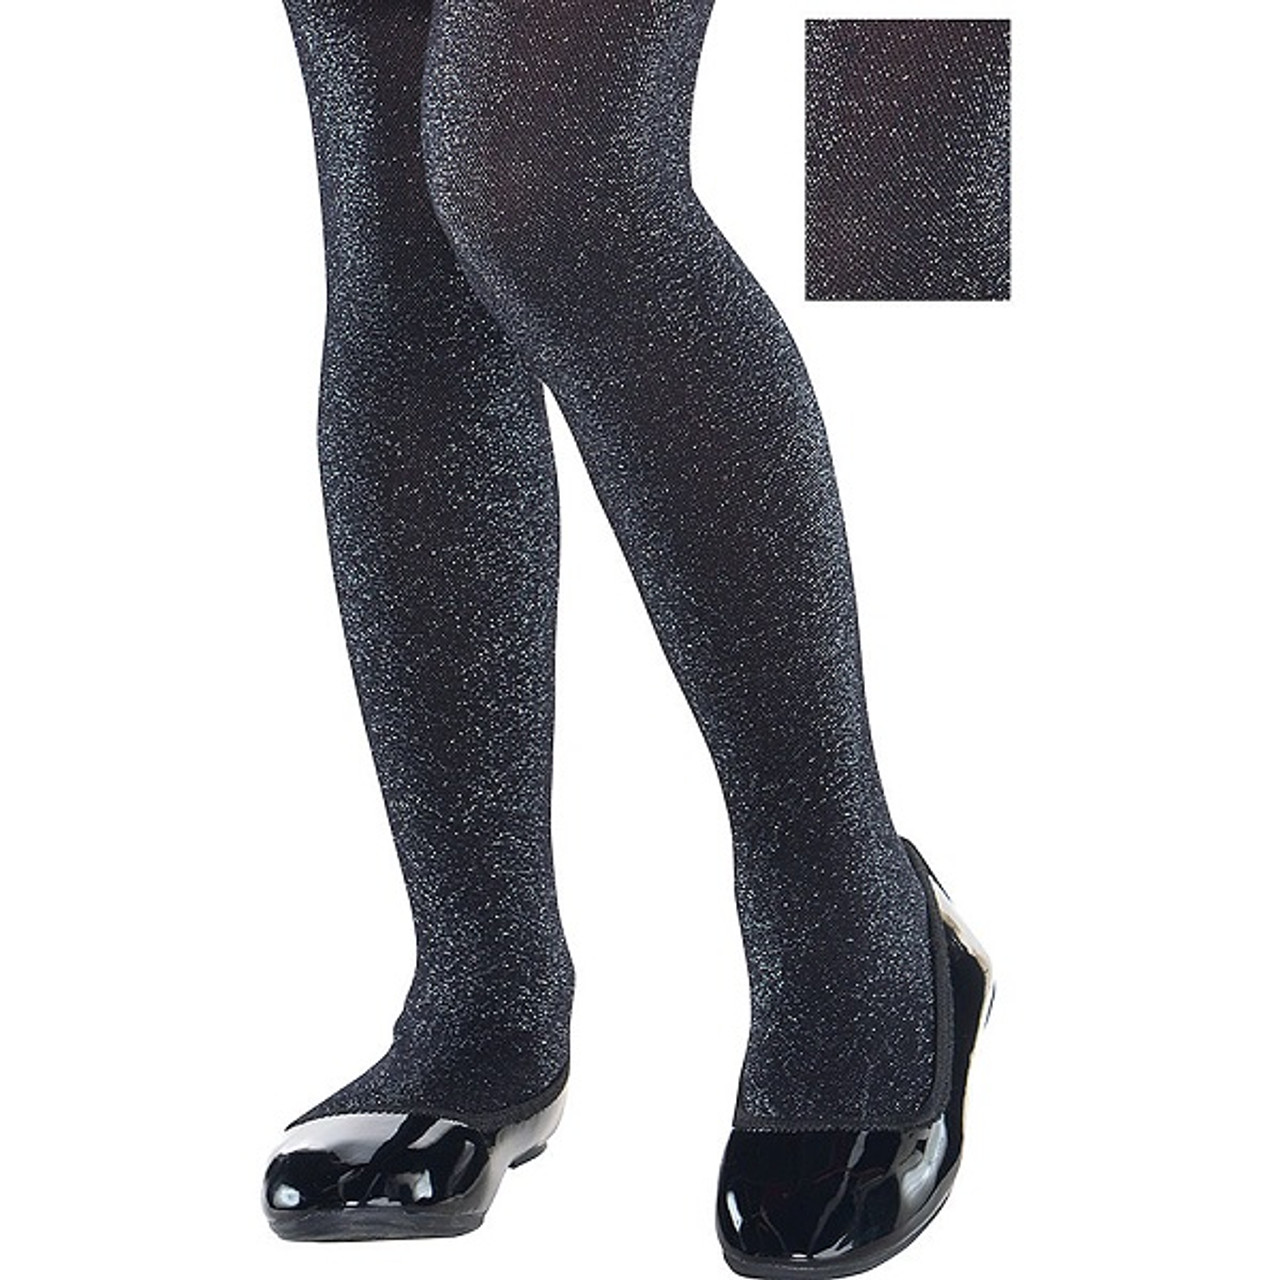 Buy Women 2 Pack 20D Thin Sparkle Glitter Shimmer Tights Legging Stocking  Pantyhose Black Nude at